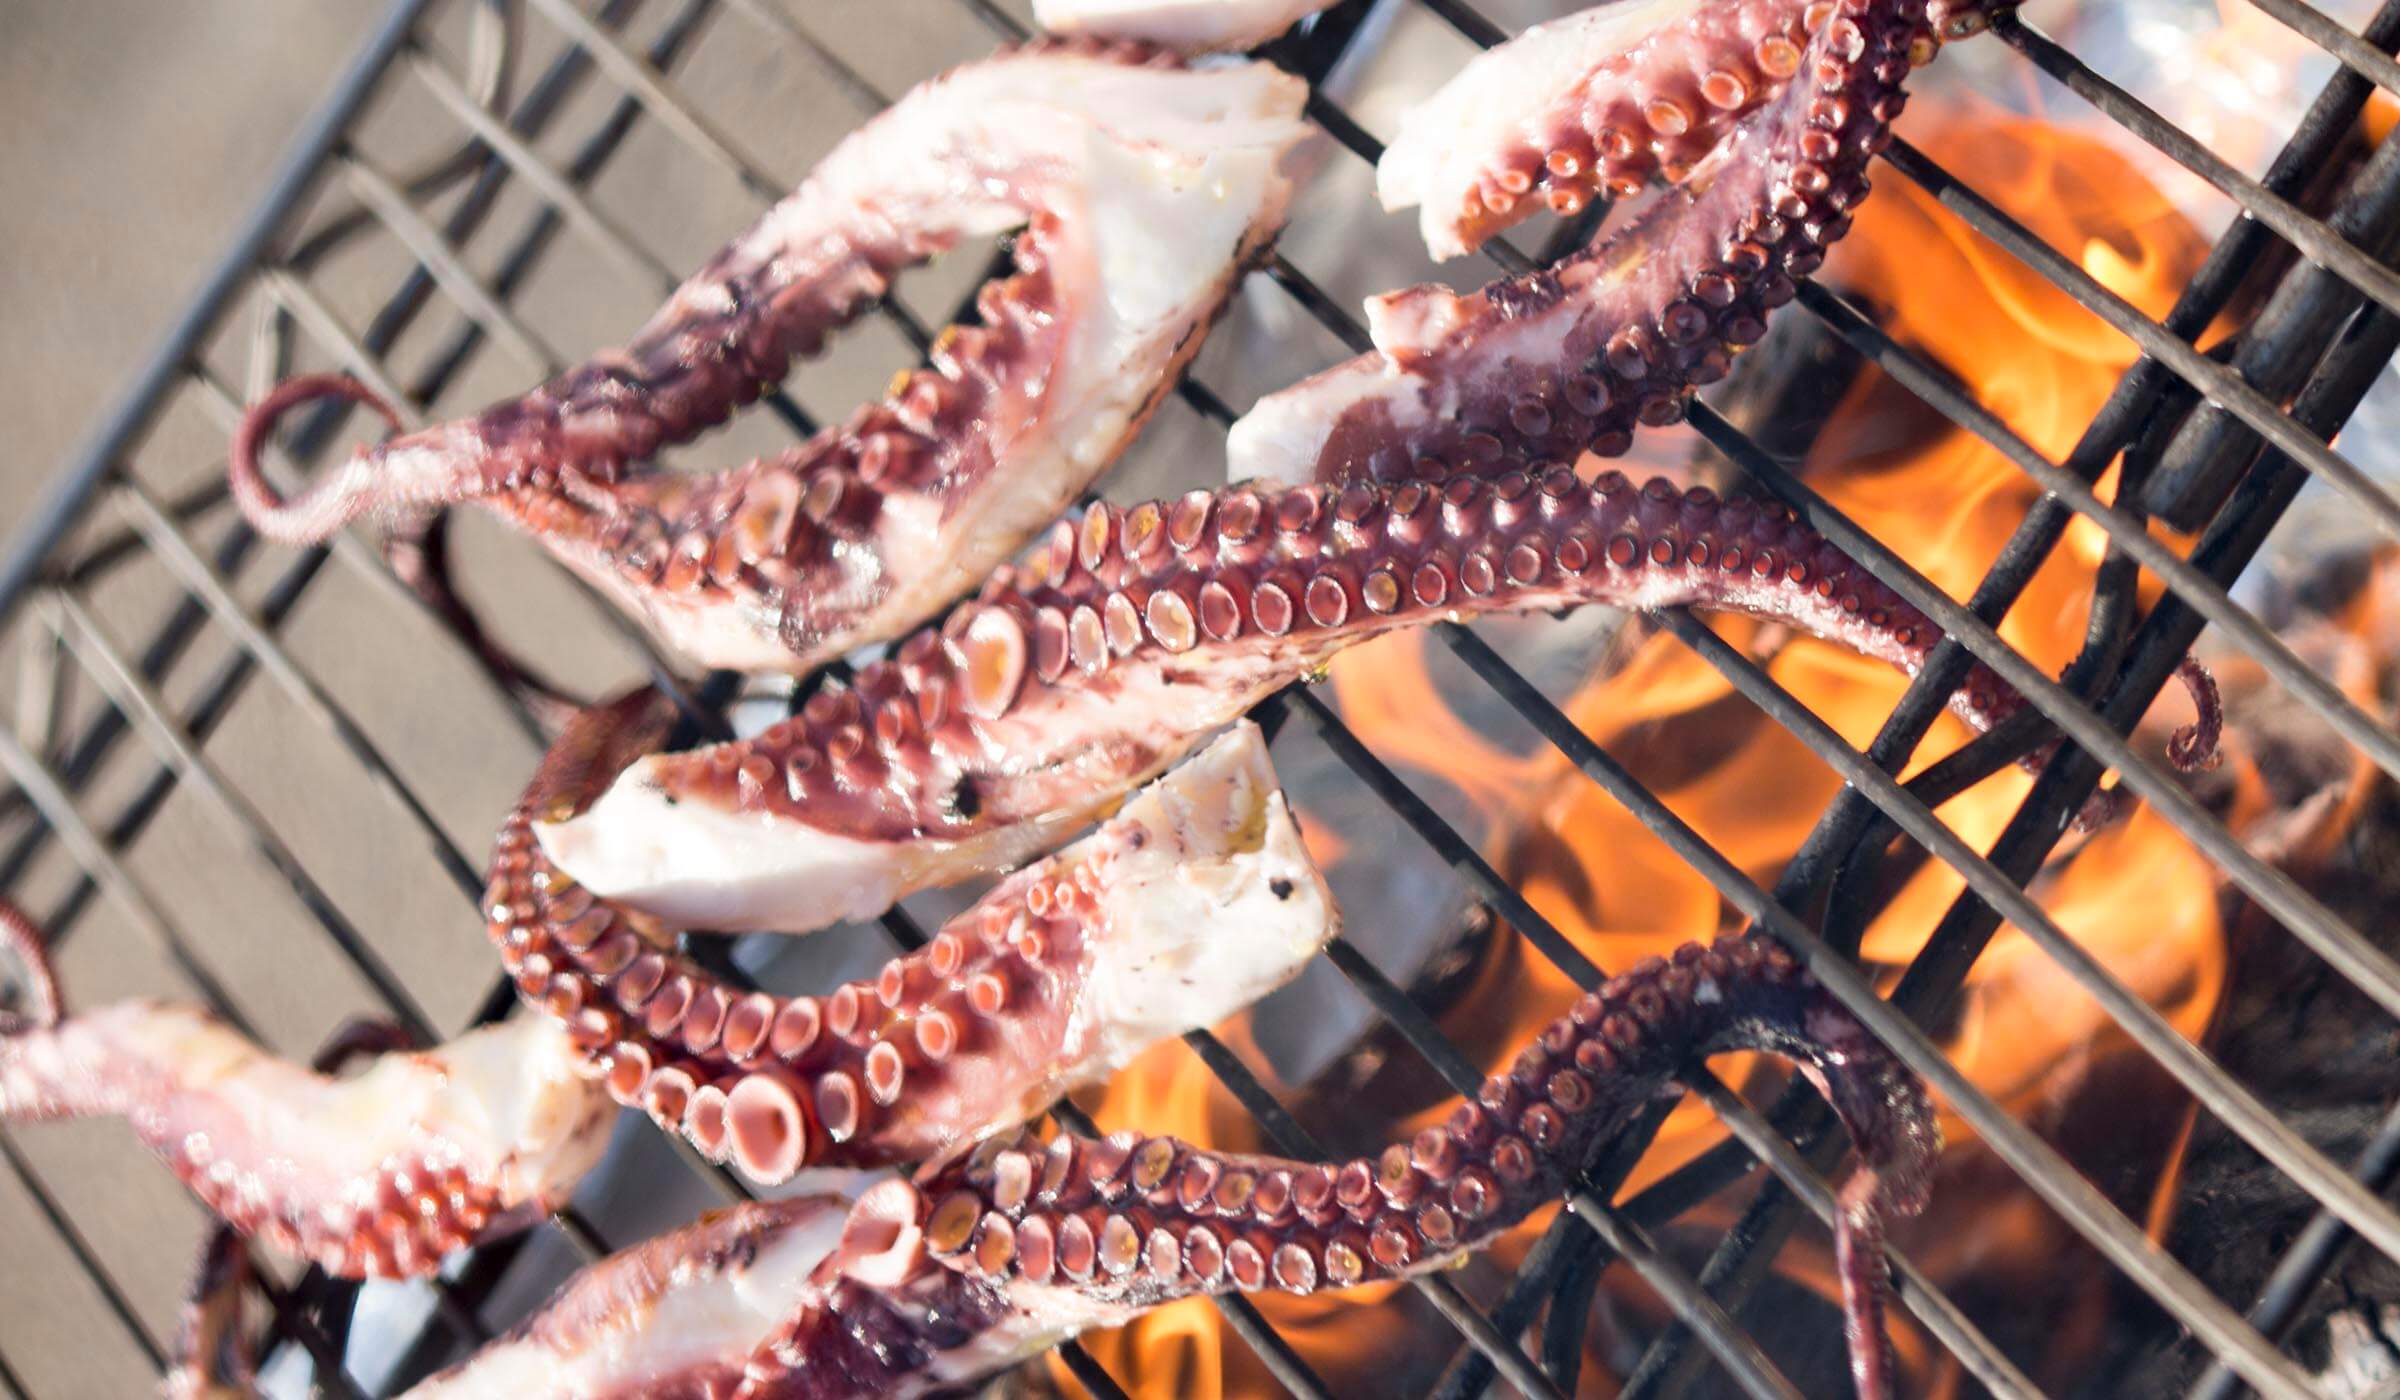 grilling octopus over an open flame